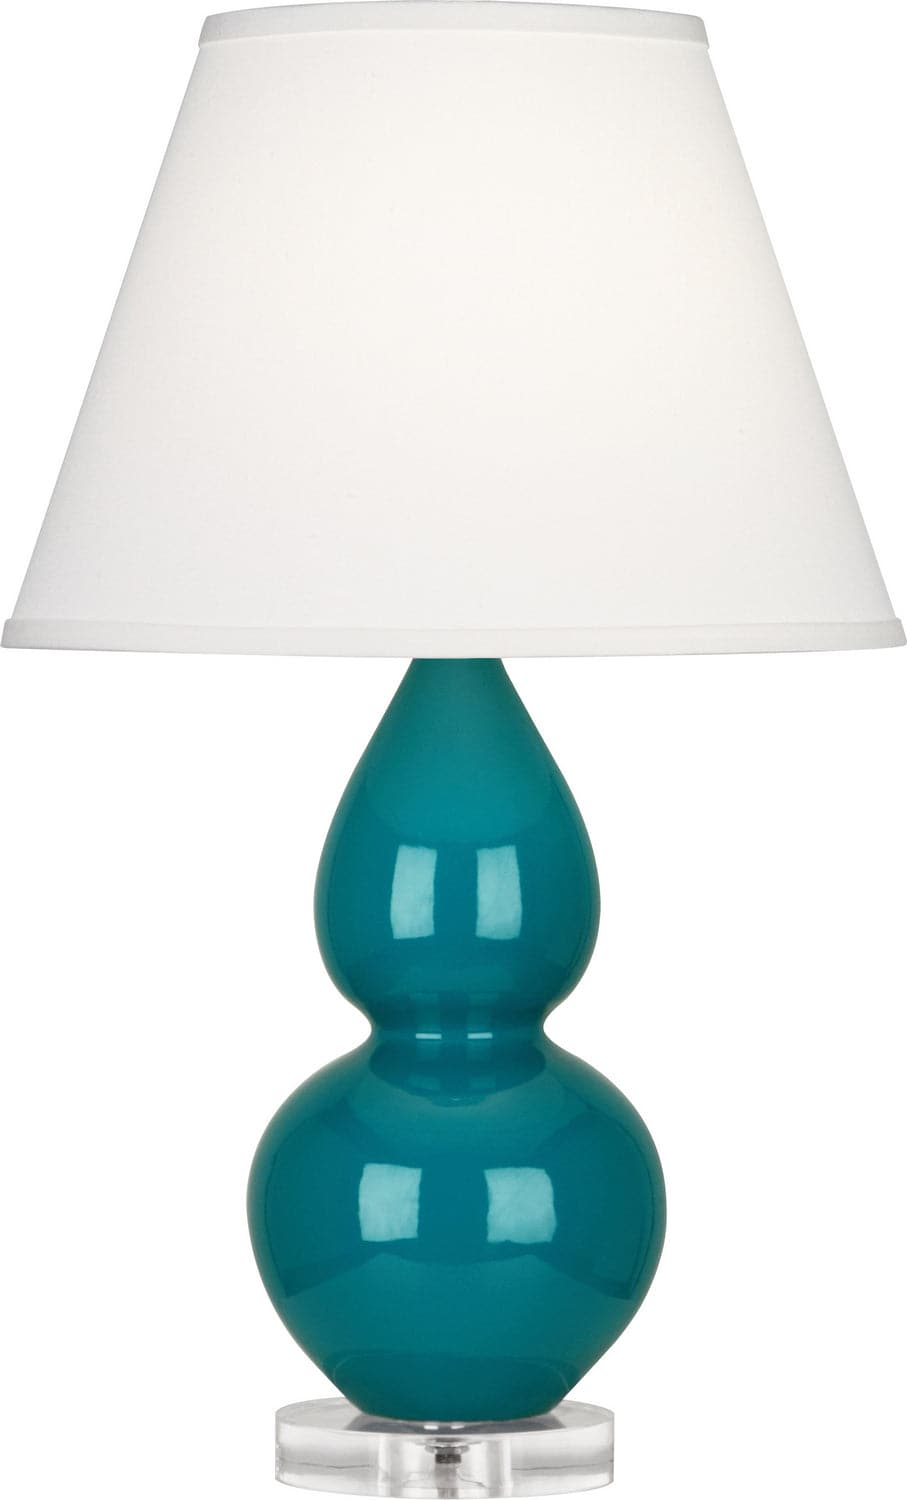 Robert Abbey - A773X - One Light Accent Lamp - Small Double Gourd - Peacock Glazed w/Lucite Base